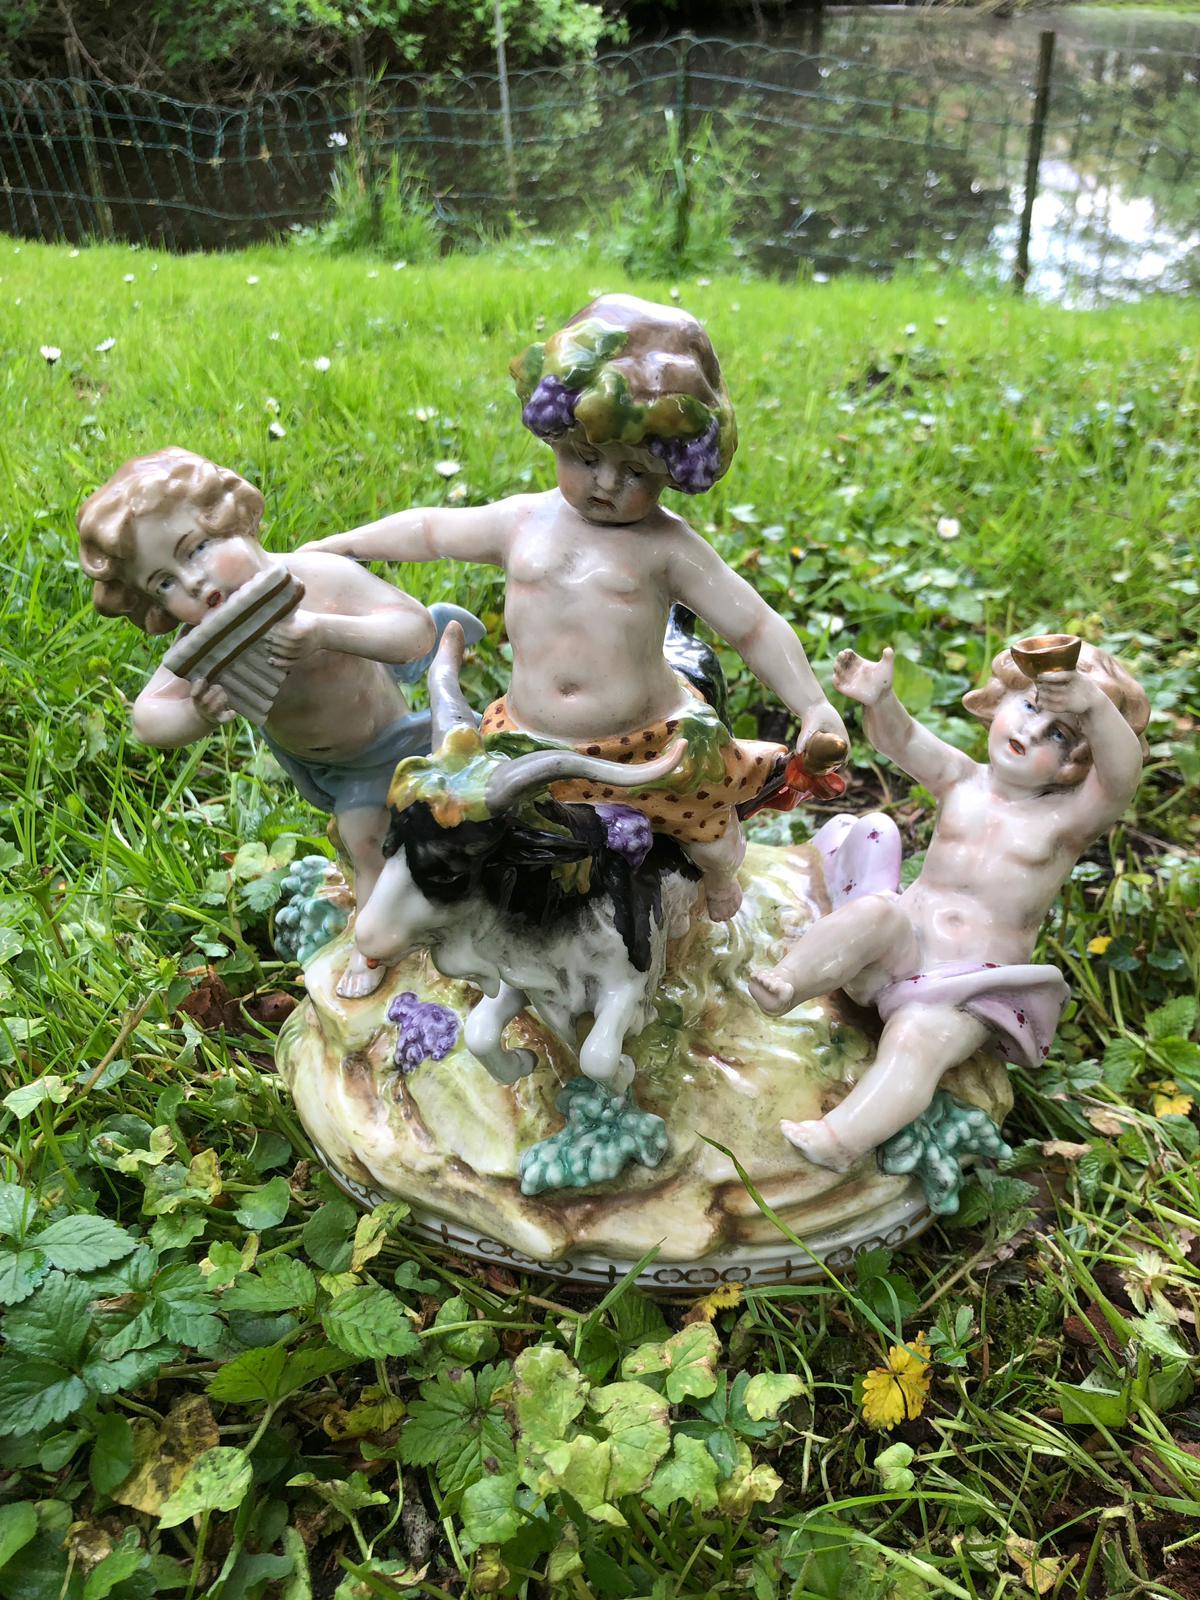 House of Scheibe Alsbach founded in 1835. The porcelain figures are manufactured in Germany, before 1989. The figures are a buck with children. The figure is handmade from porcelain and painted in many colors. It is a beautiful detailed artwork! The